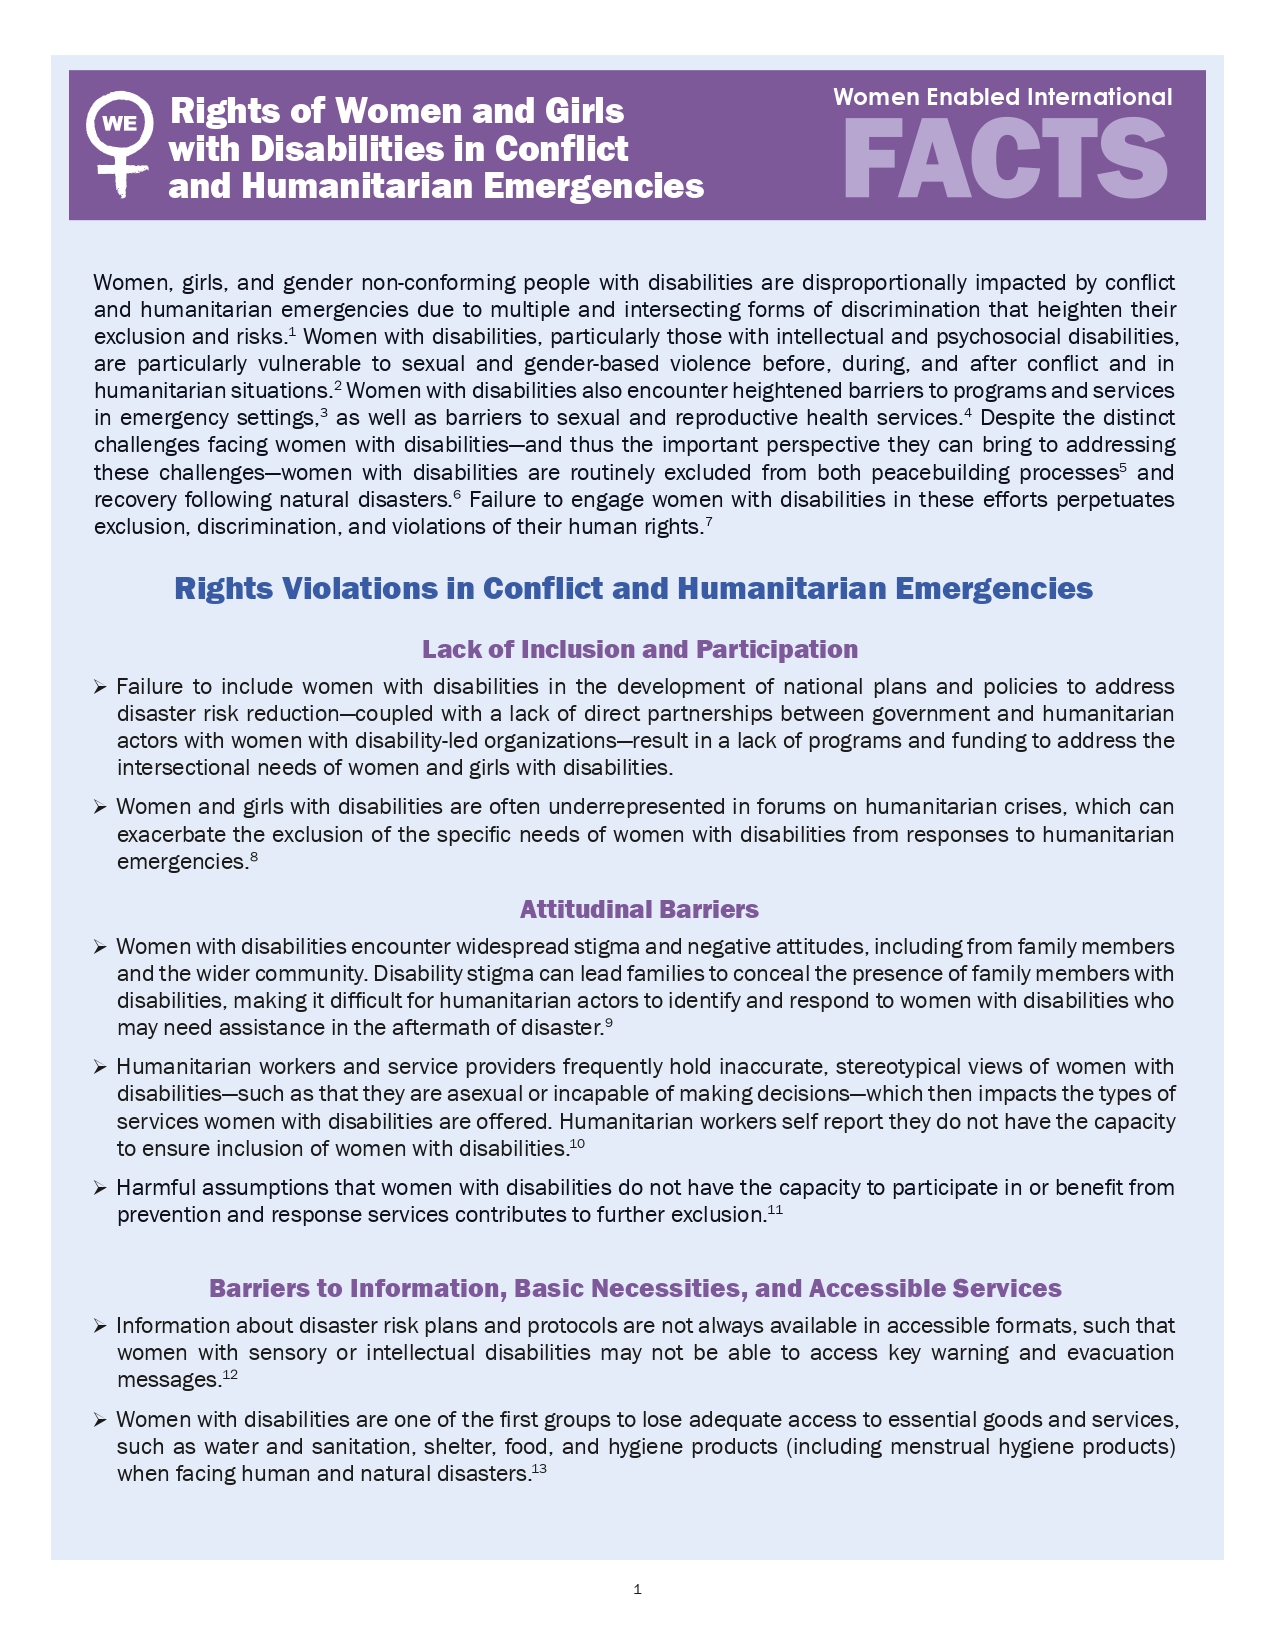 Rights of Women and Girls with Disabilities in Conflict and Humanitarian Emergencies